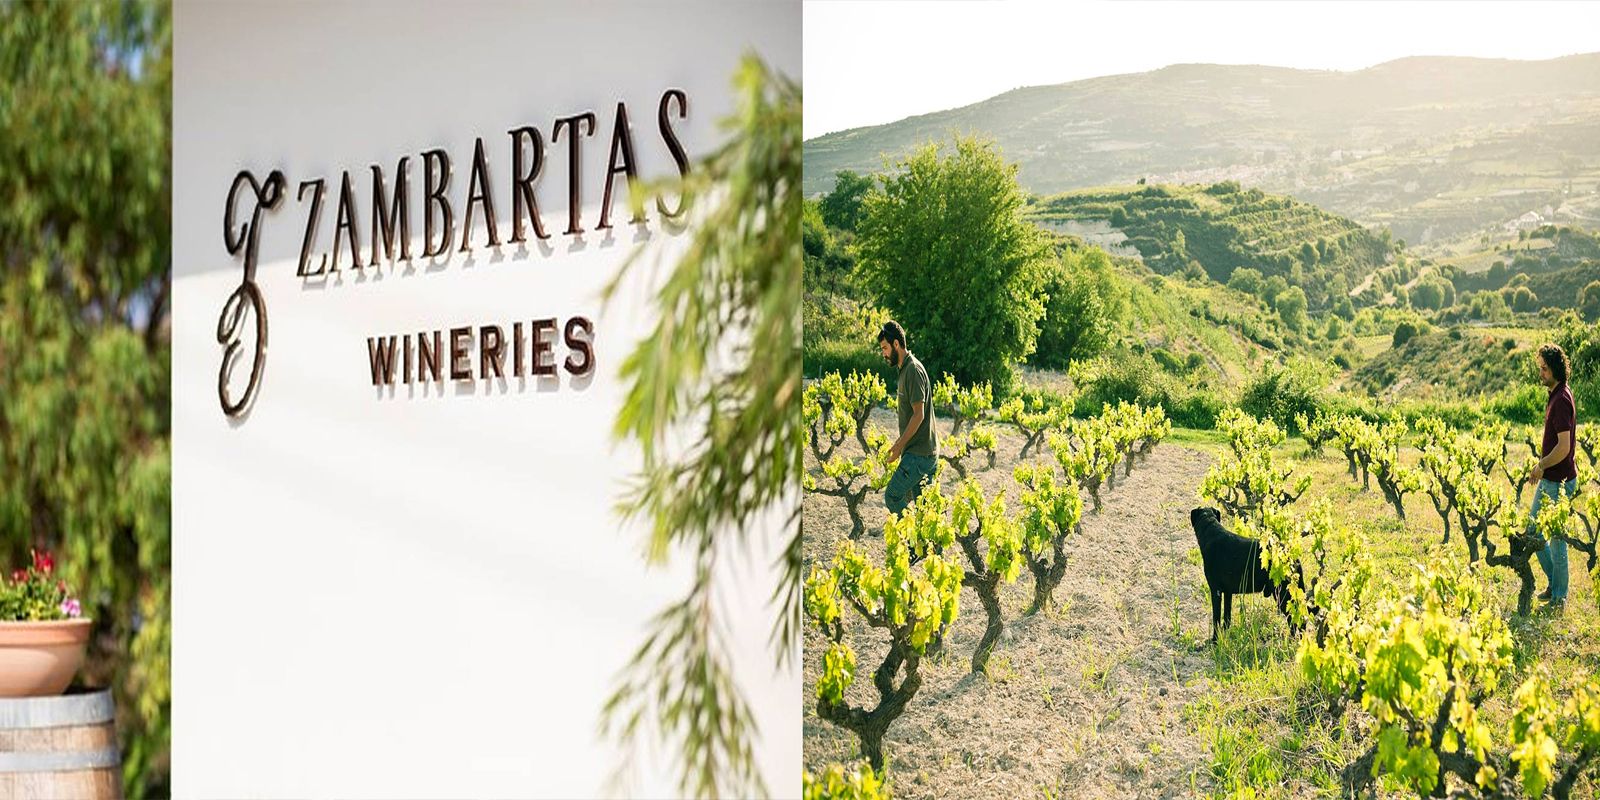 Zmbartas Winery in Cyprus